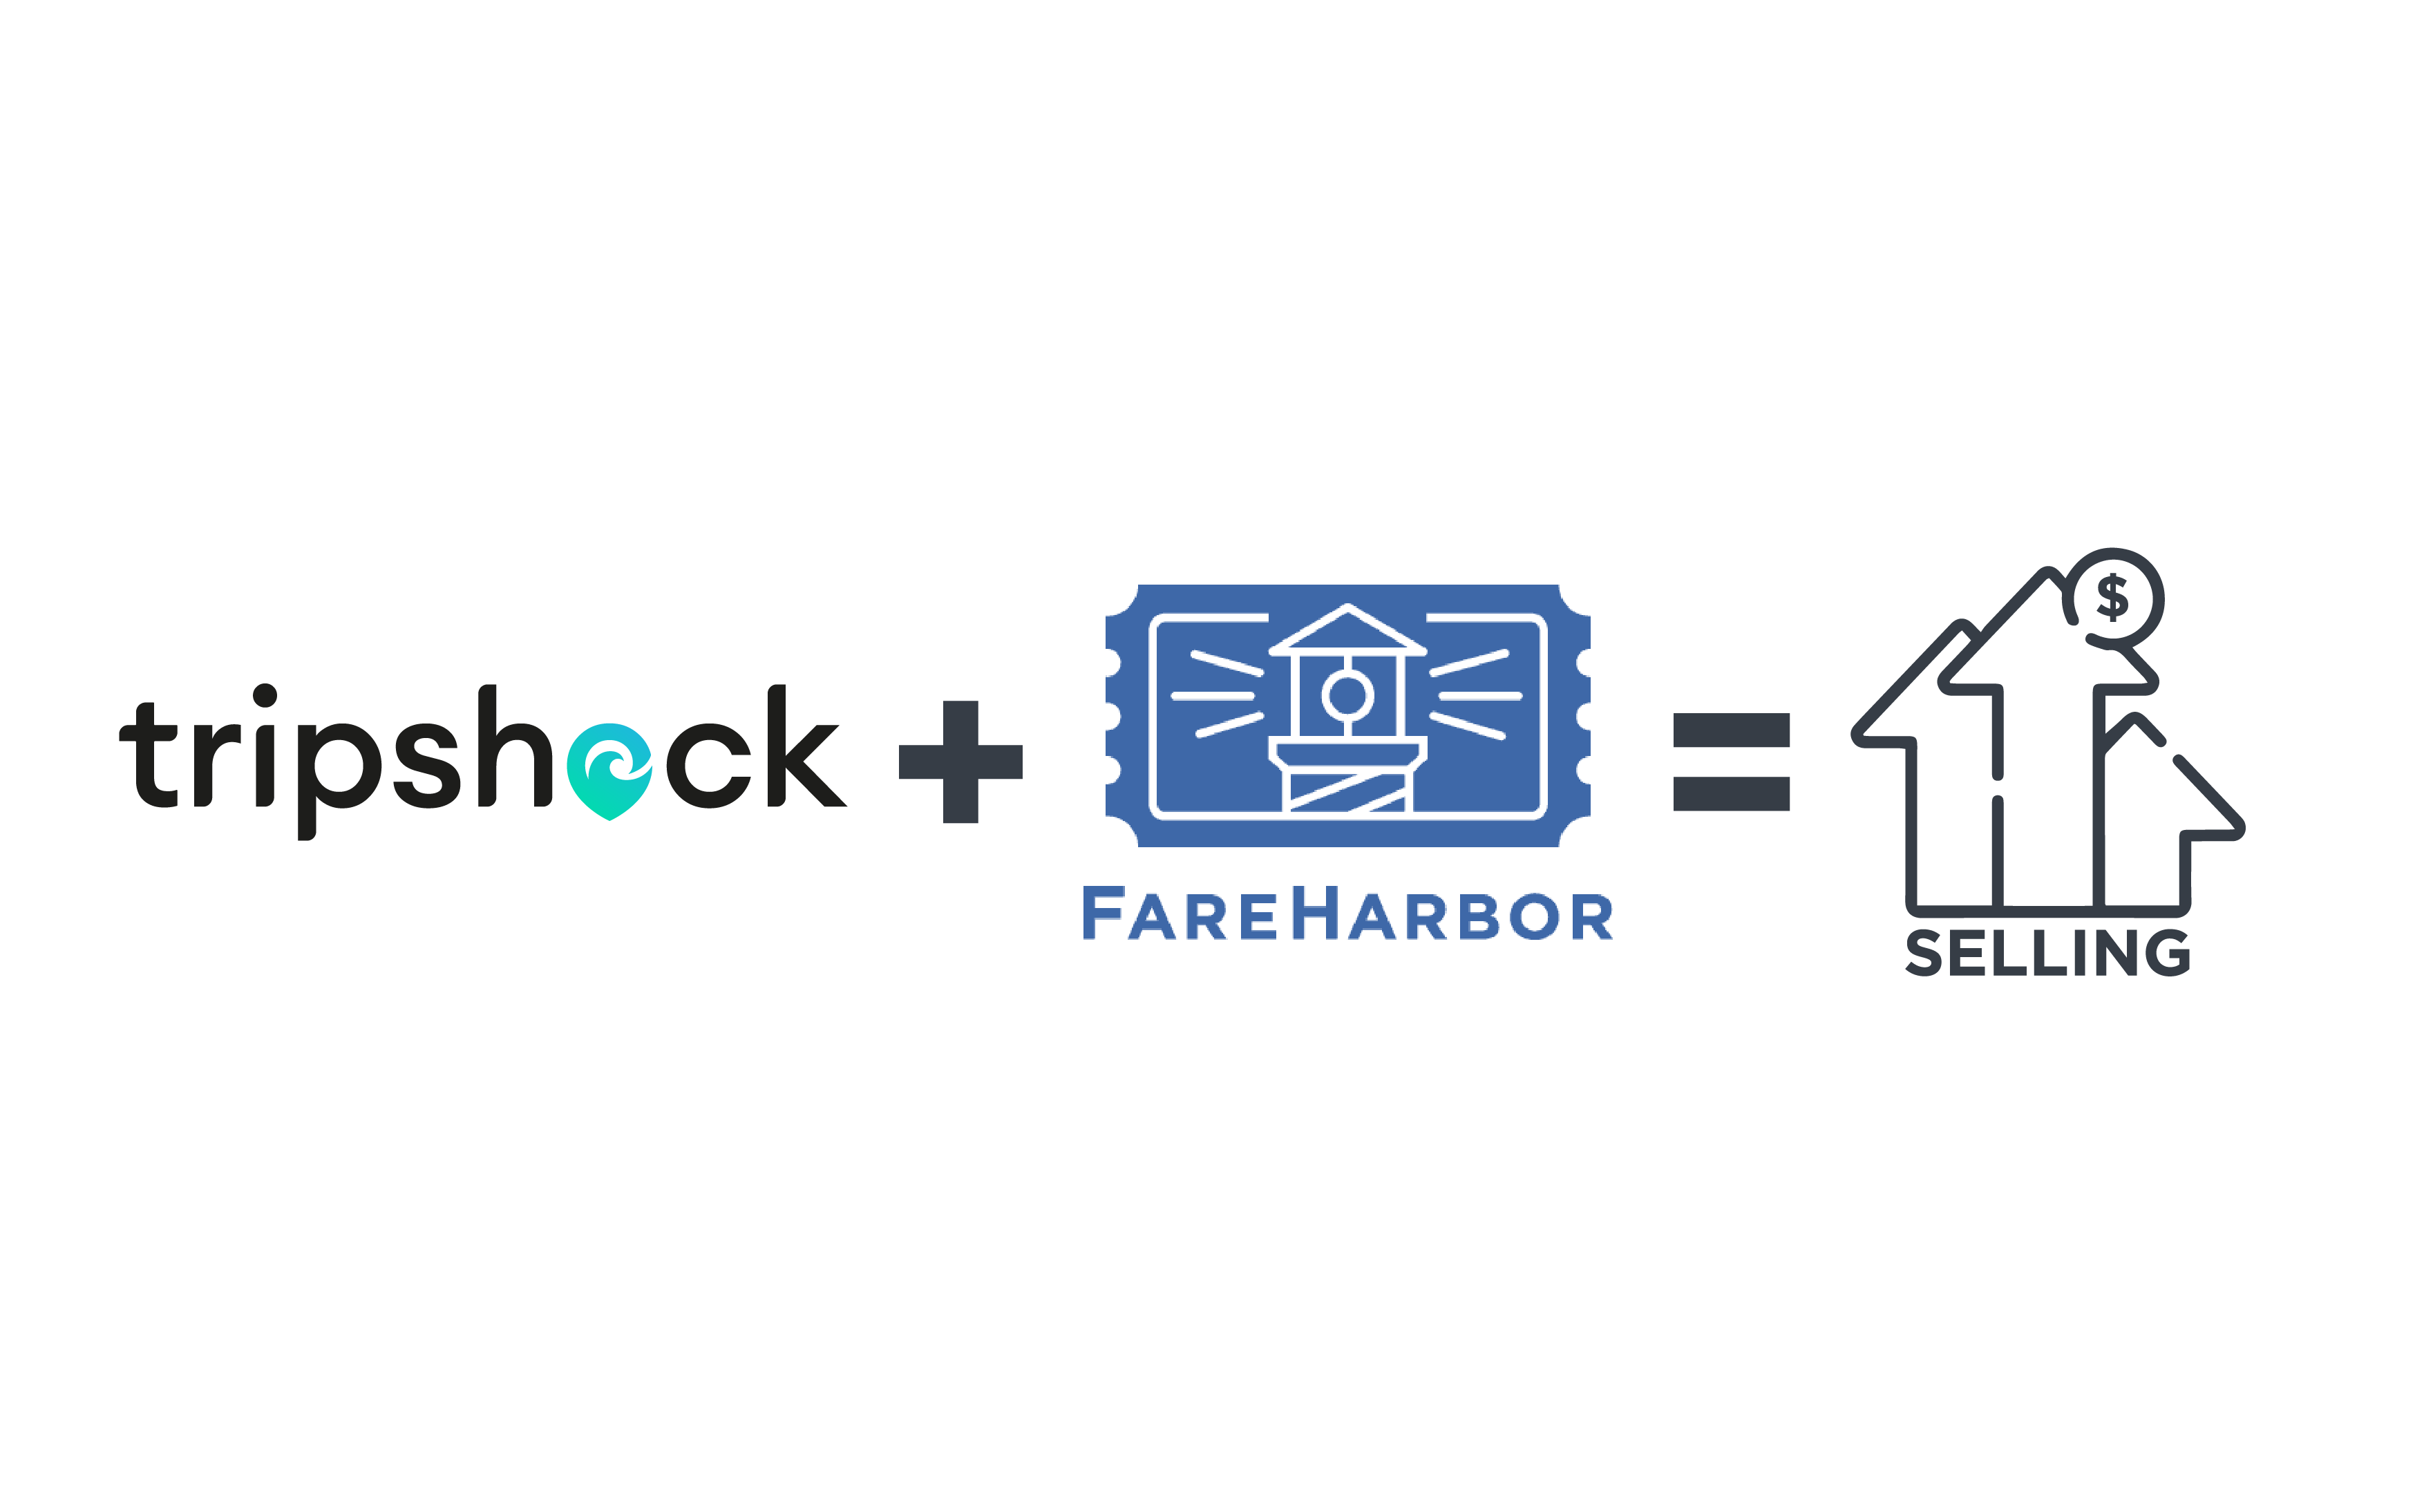 FareHarbor Connection Makes Selling with TripShock Easy!